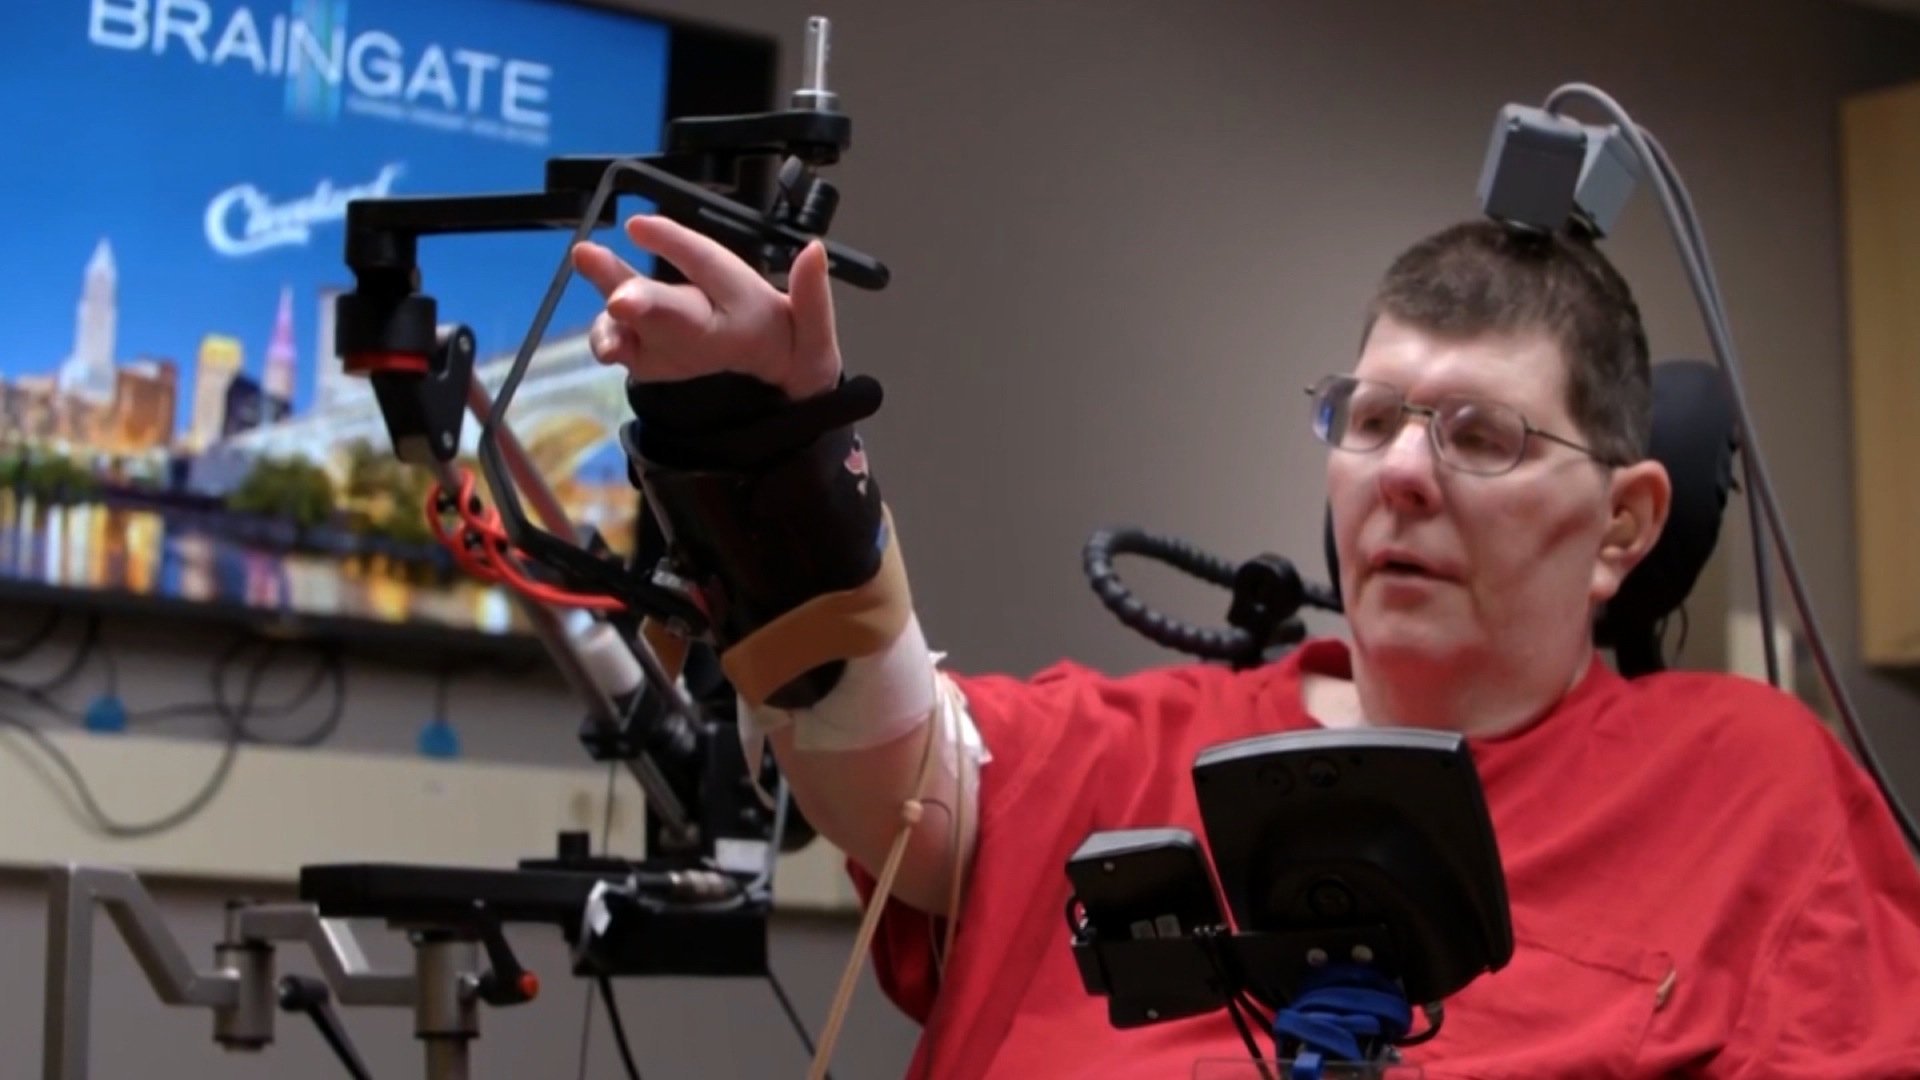 Bill Kochevar has regained use of his right hand with the aid of an experimental prosthetic that replaces lost connections between the brain and the muscles.